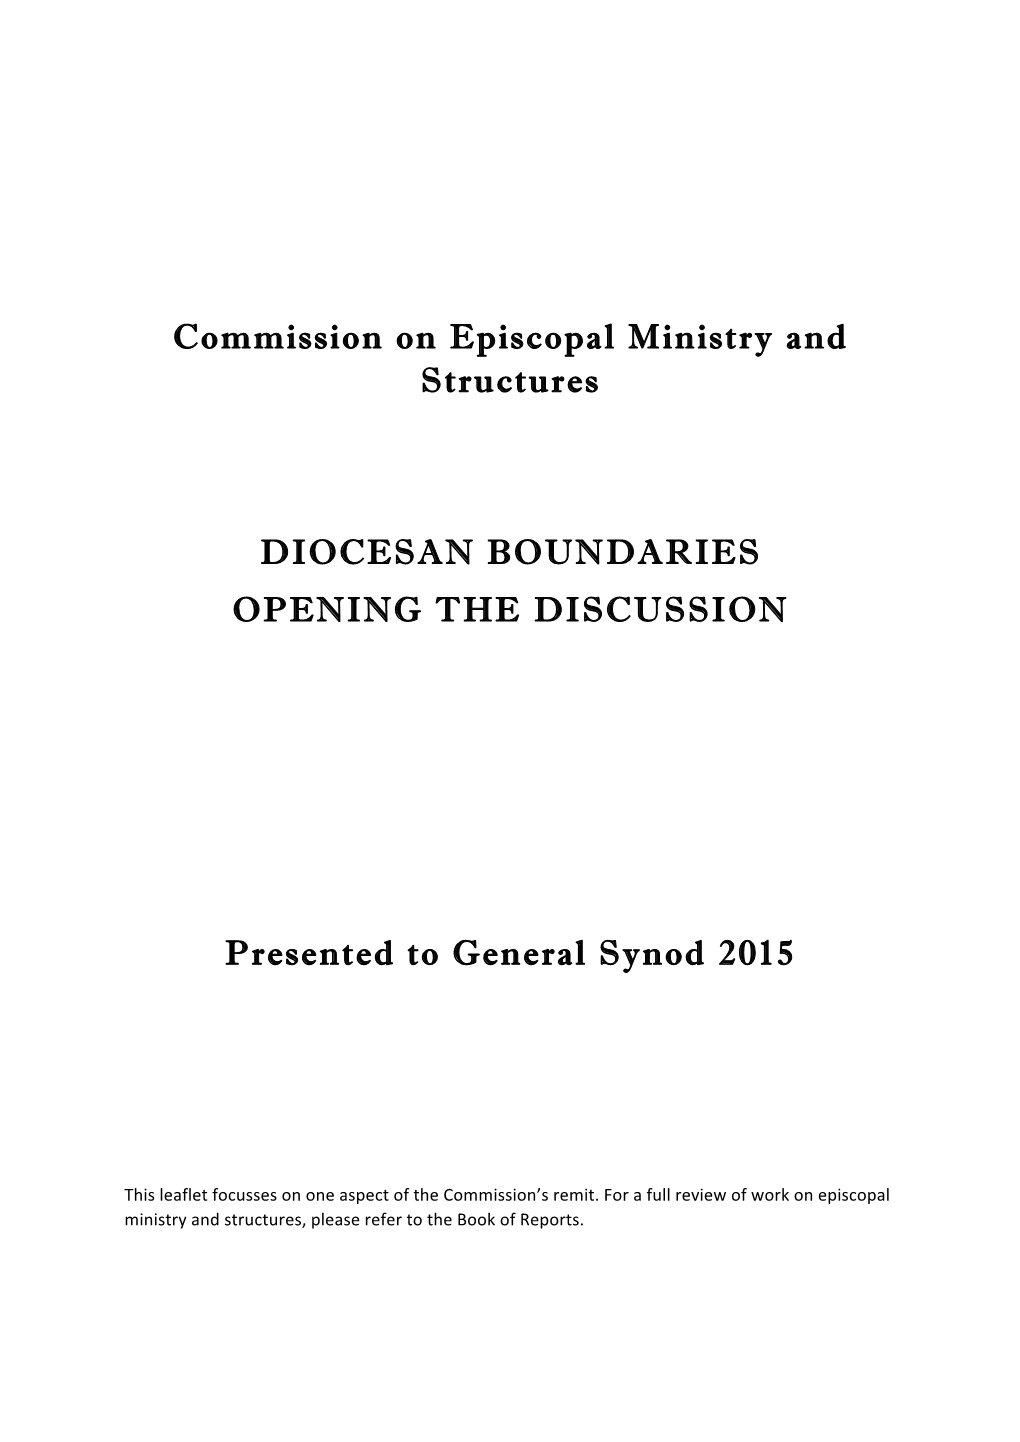 Commission on Episcopal Ministry and Structures DIOCESAN